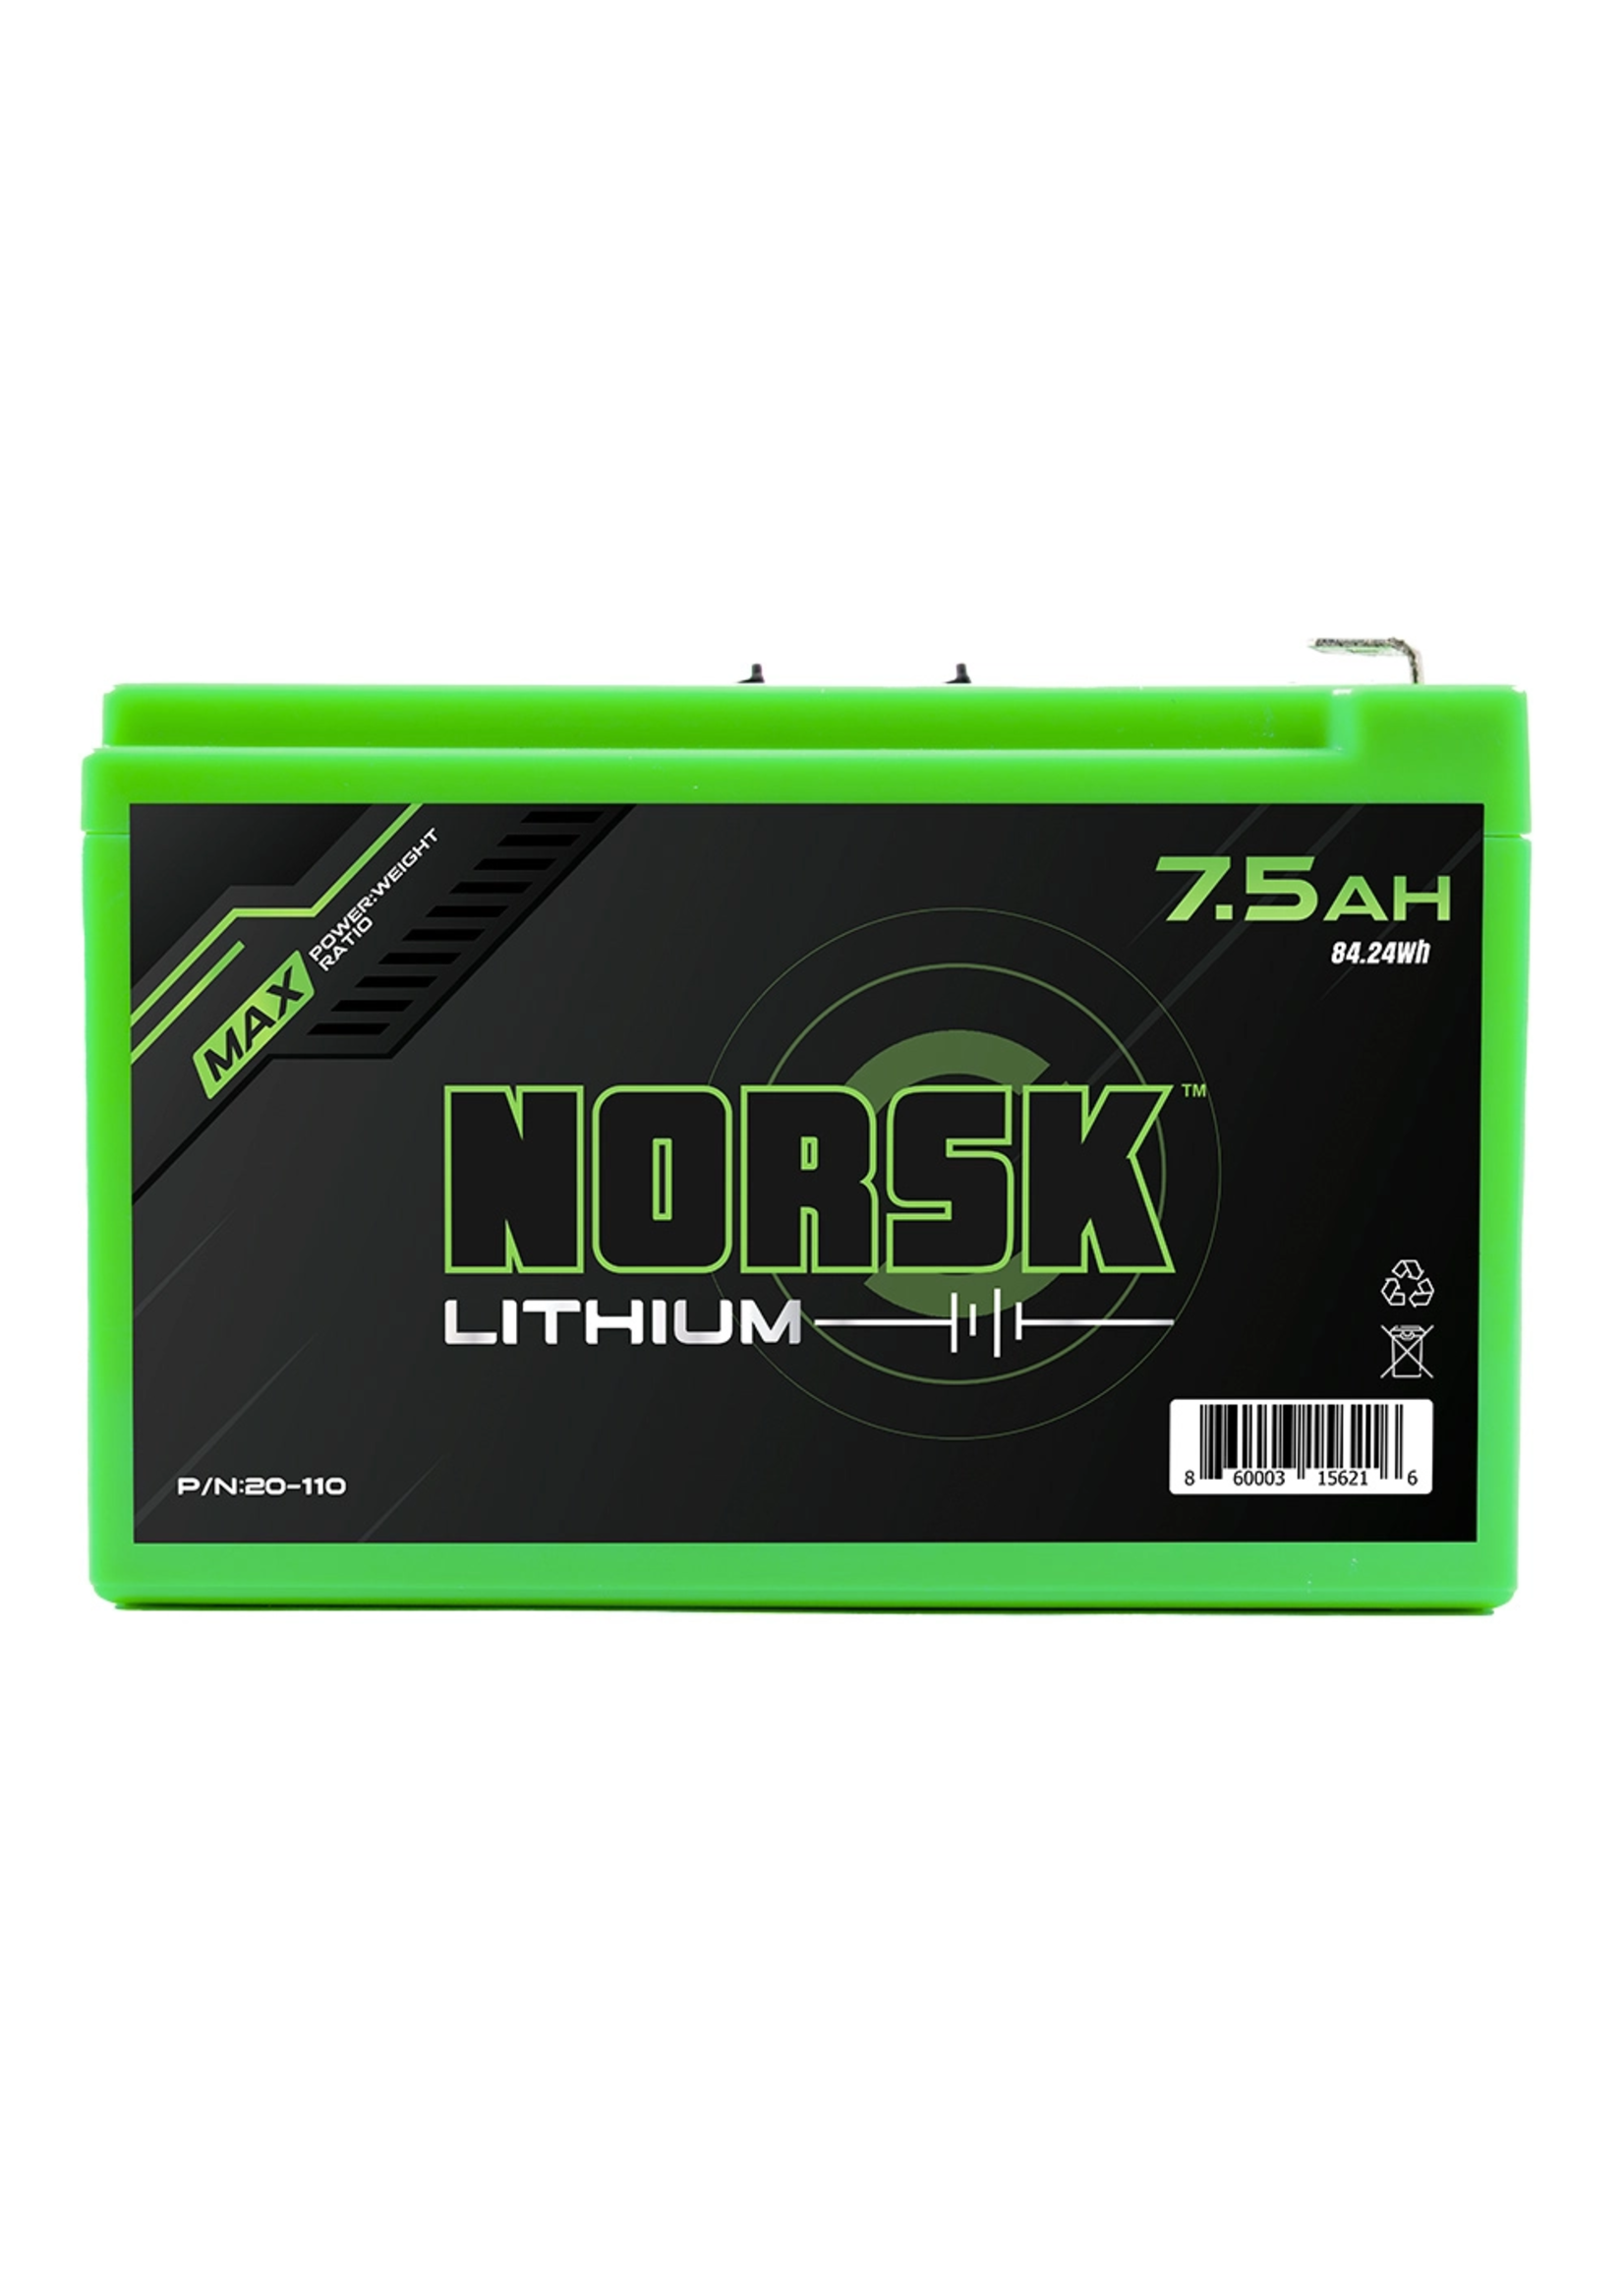 NORSK Lithium NORSK Lithium 7.5AH Lithium Ion Battery